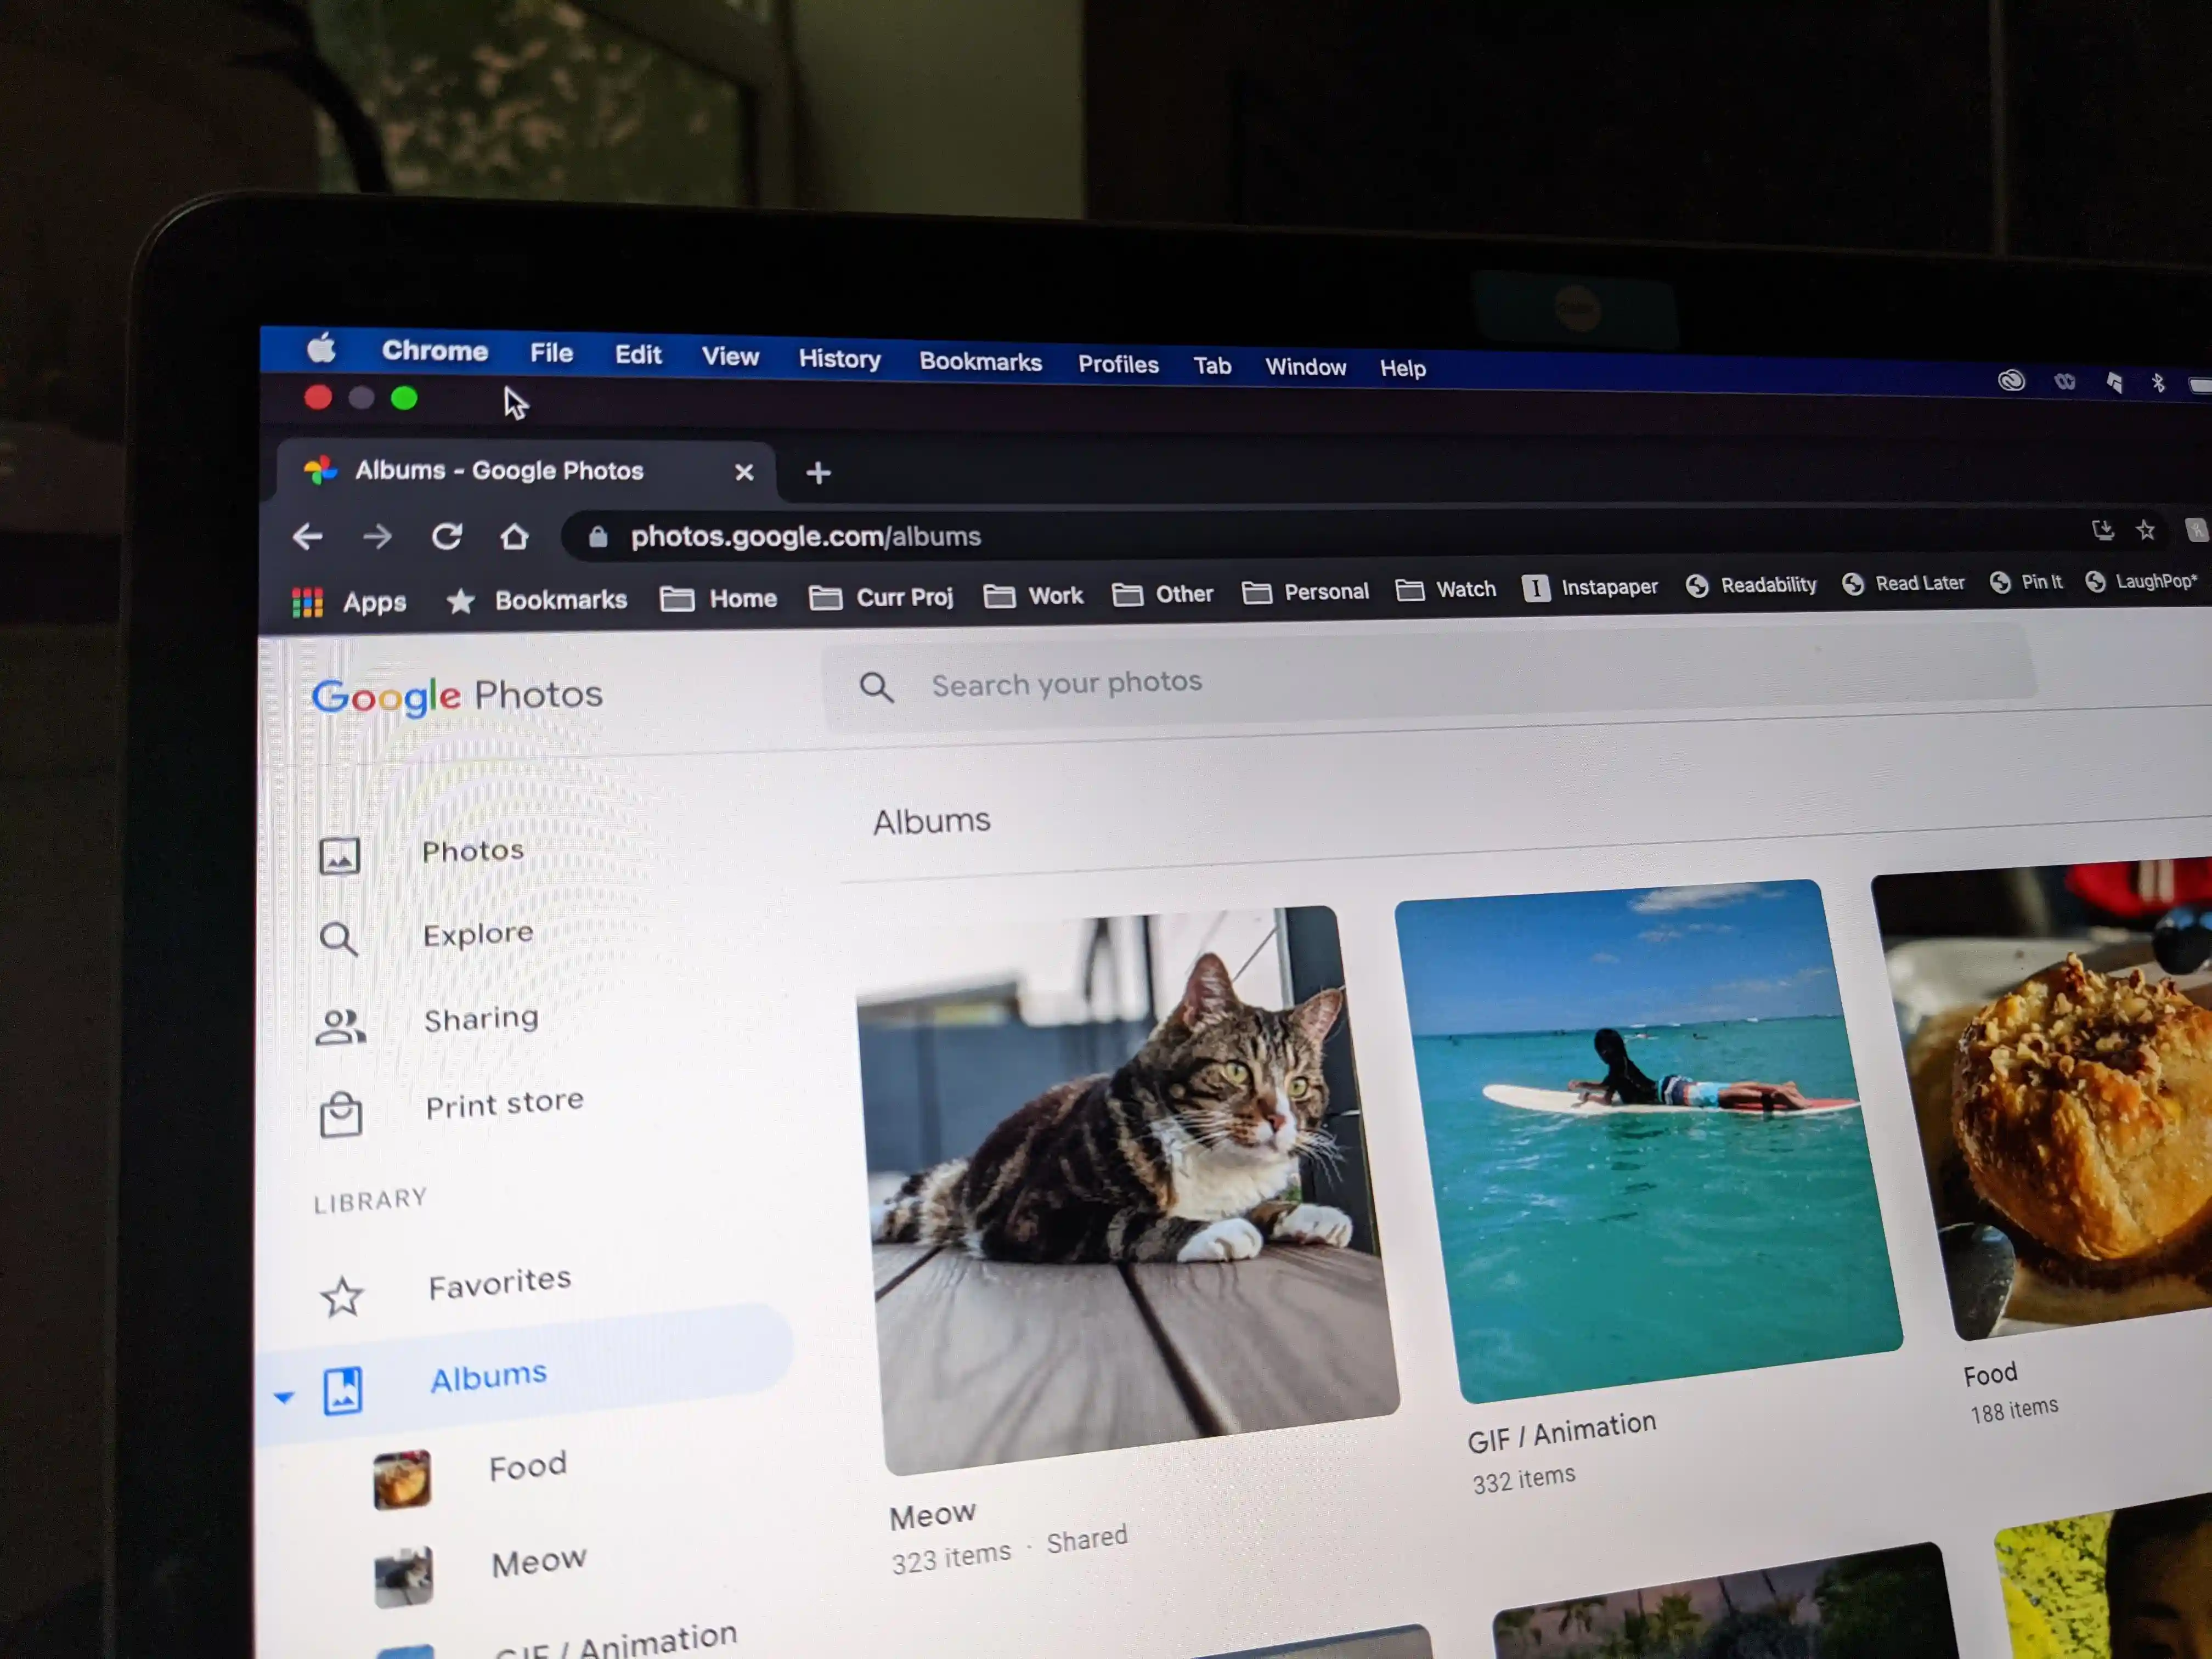 Google Photos albums page view